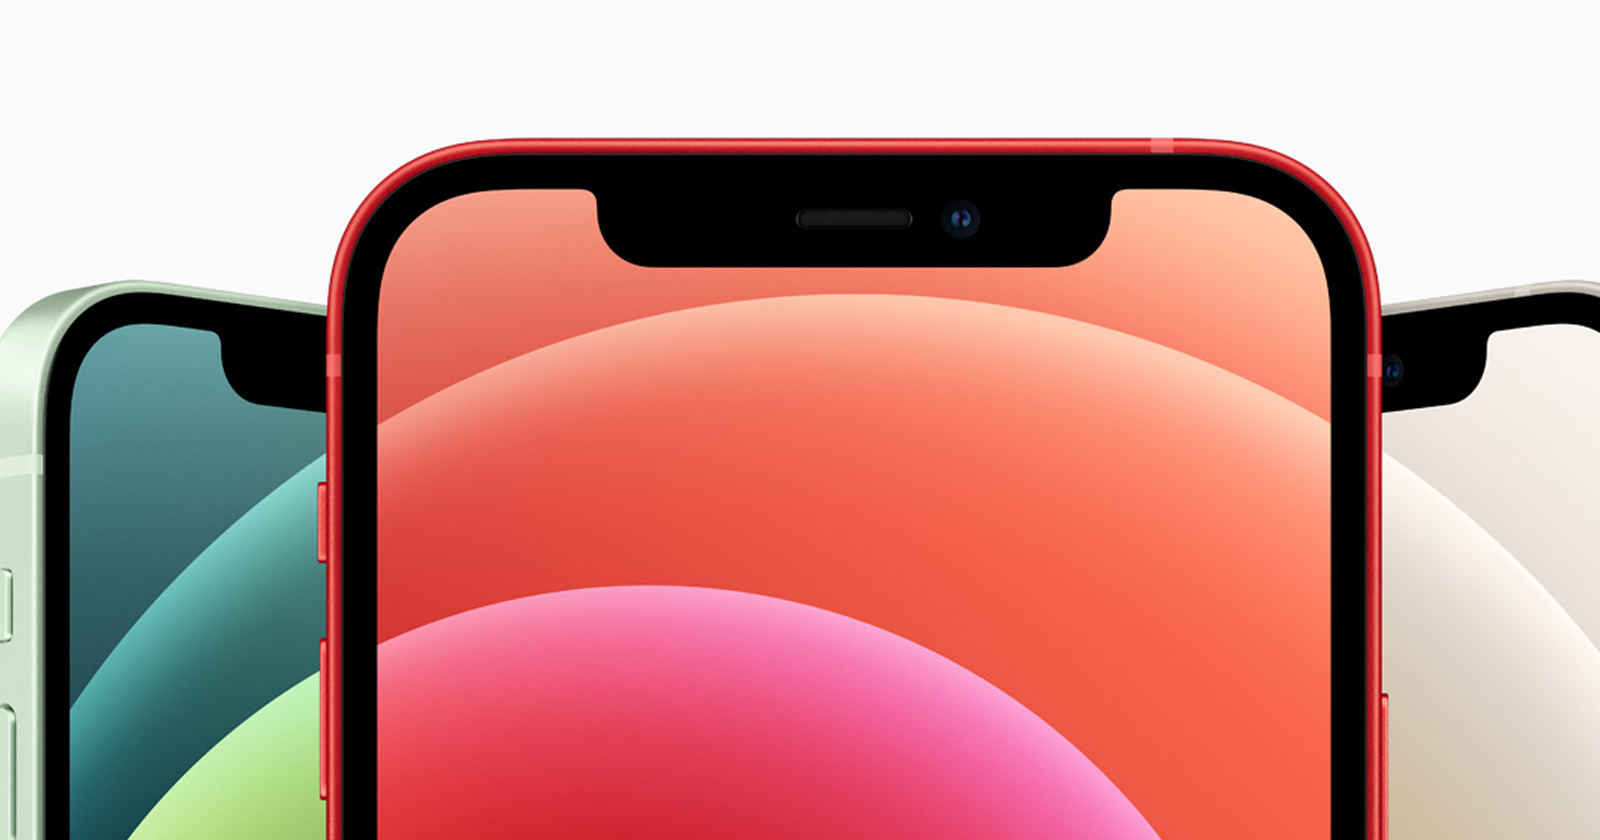 Redesigned Selfie Camera, Smaller FaceID Chip on iPhone 13: Report